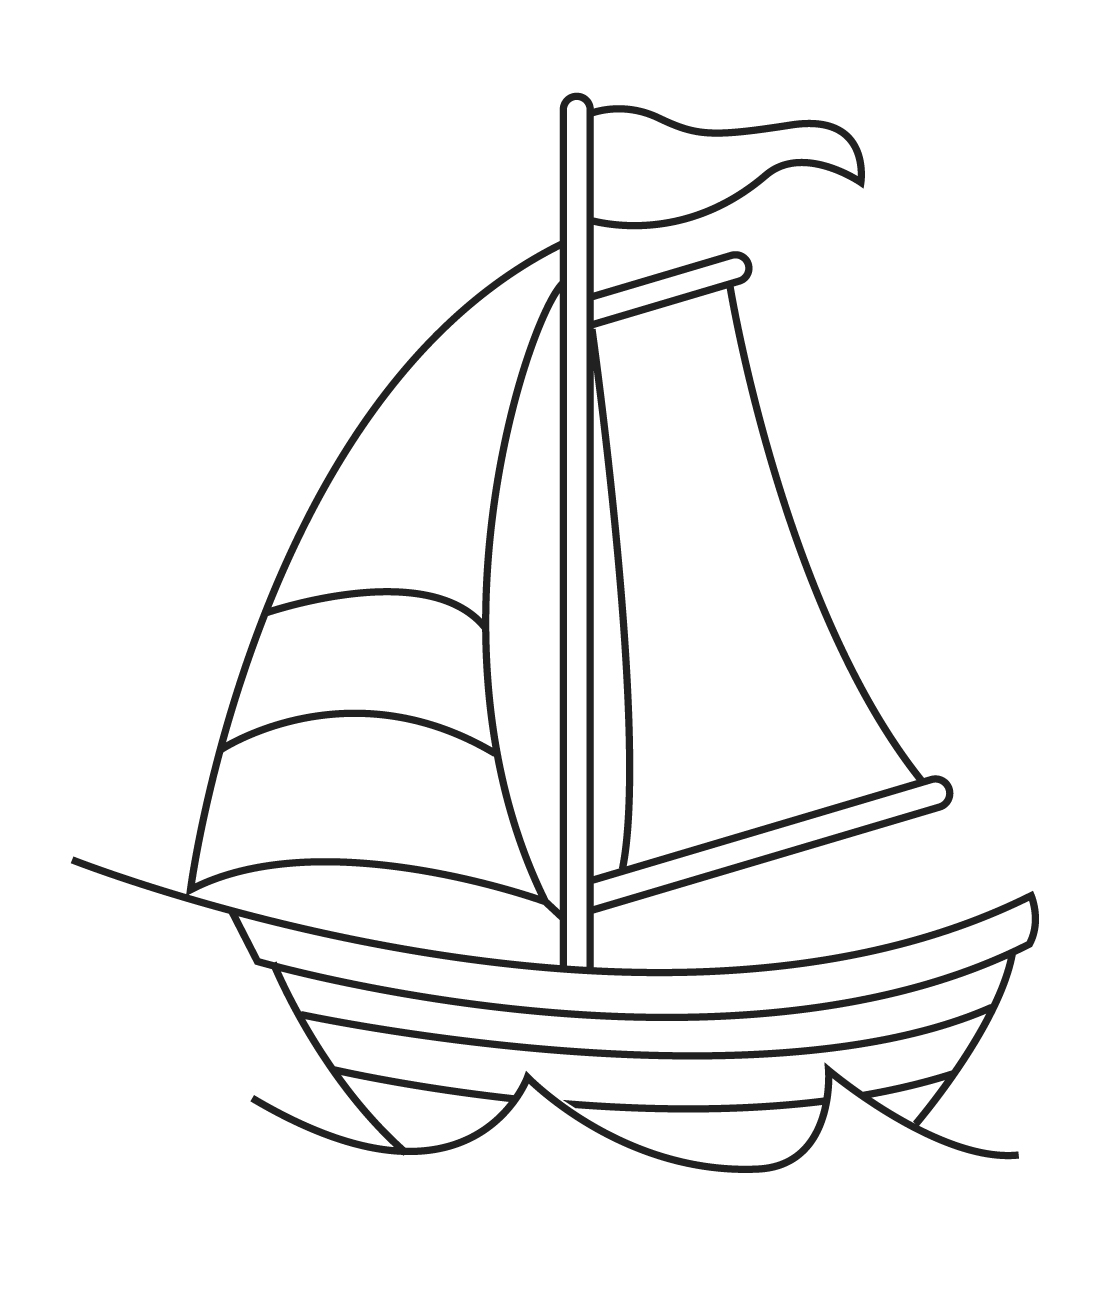 Free Simple Boat Cliparts, Download Free Clip Art, Free Clip.